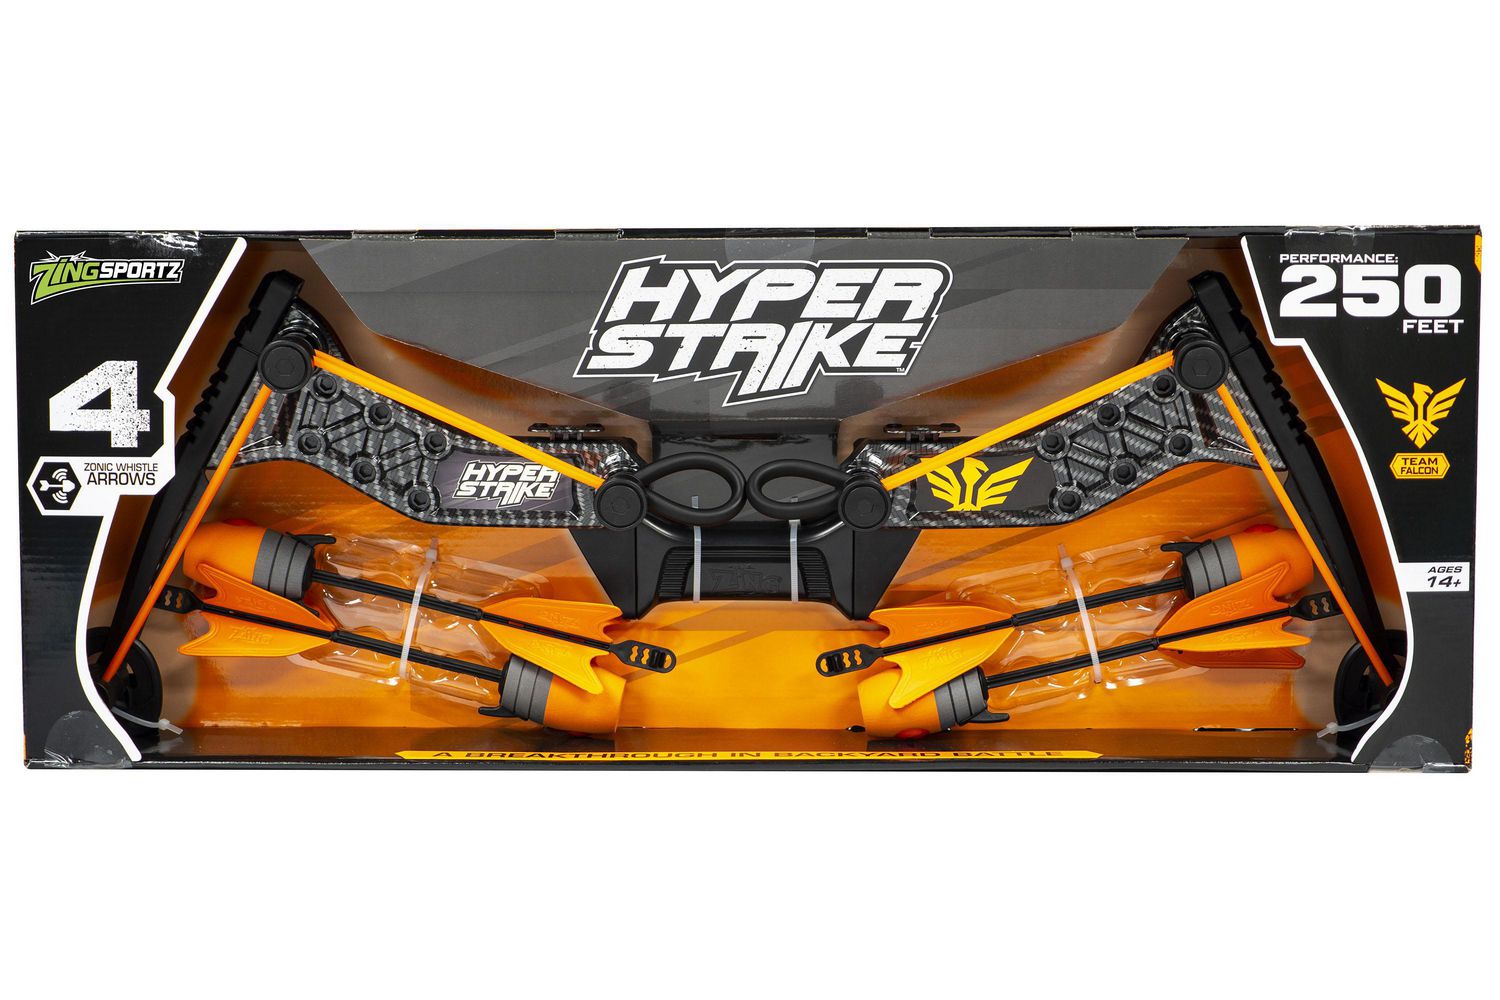 Zing HYPER Strike Orange Carbon Bow 14 Years and up Performance 250 Feet for sale online 